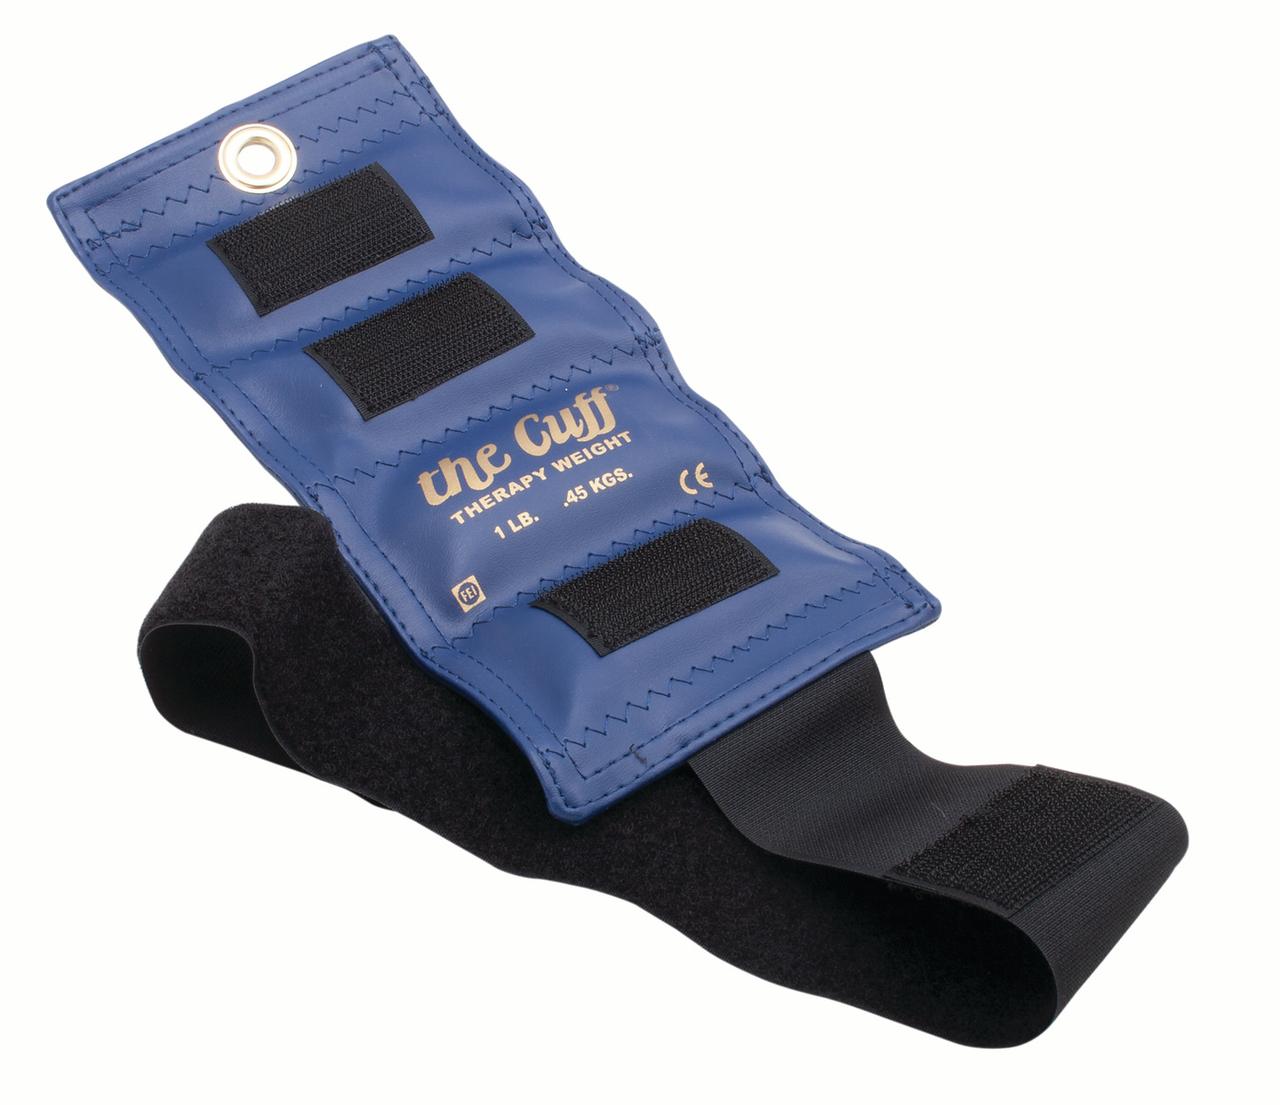 The Cuff Original Adjustable Ankle and Wrist Weight for Yoga, Dance, Running, Cardio, Aerobics, Toning, and Physical Therapy. 1 lb - Blue - image 1 of 3